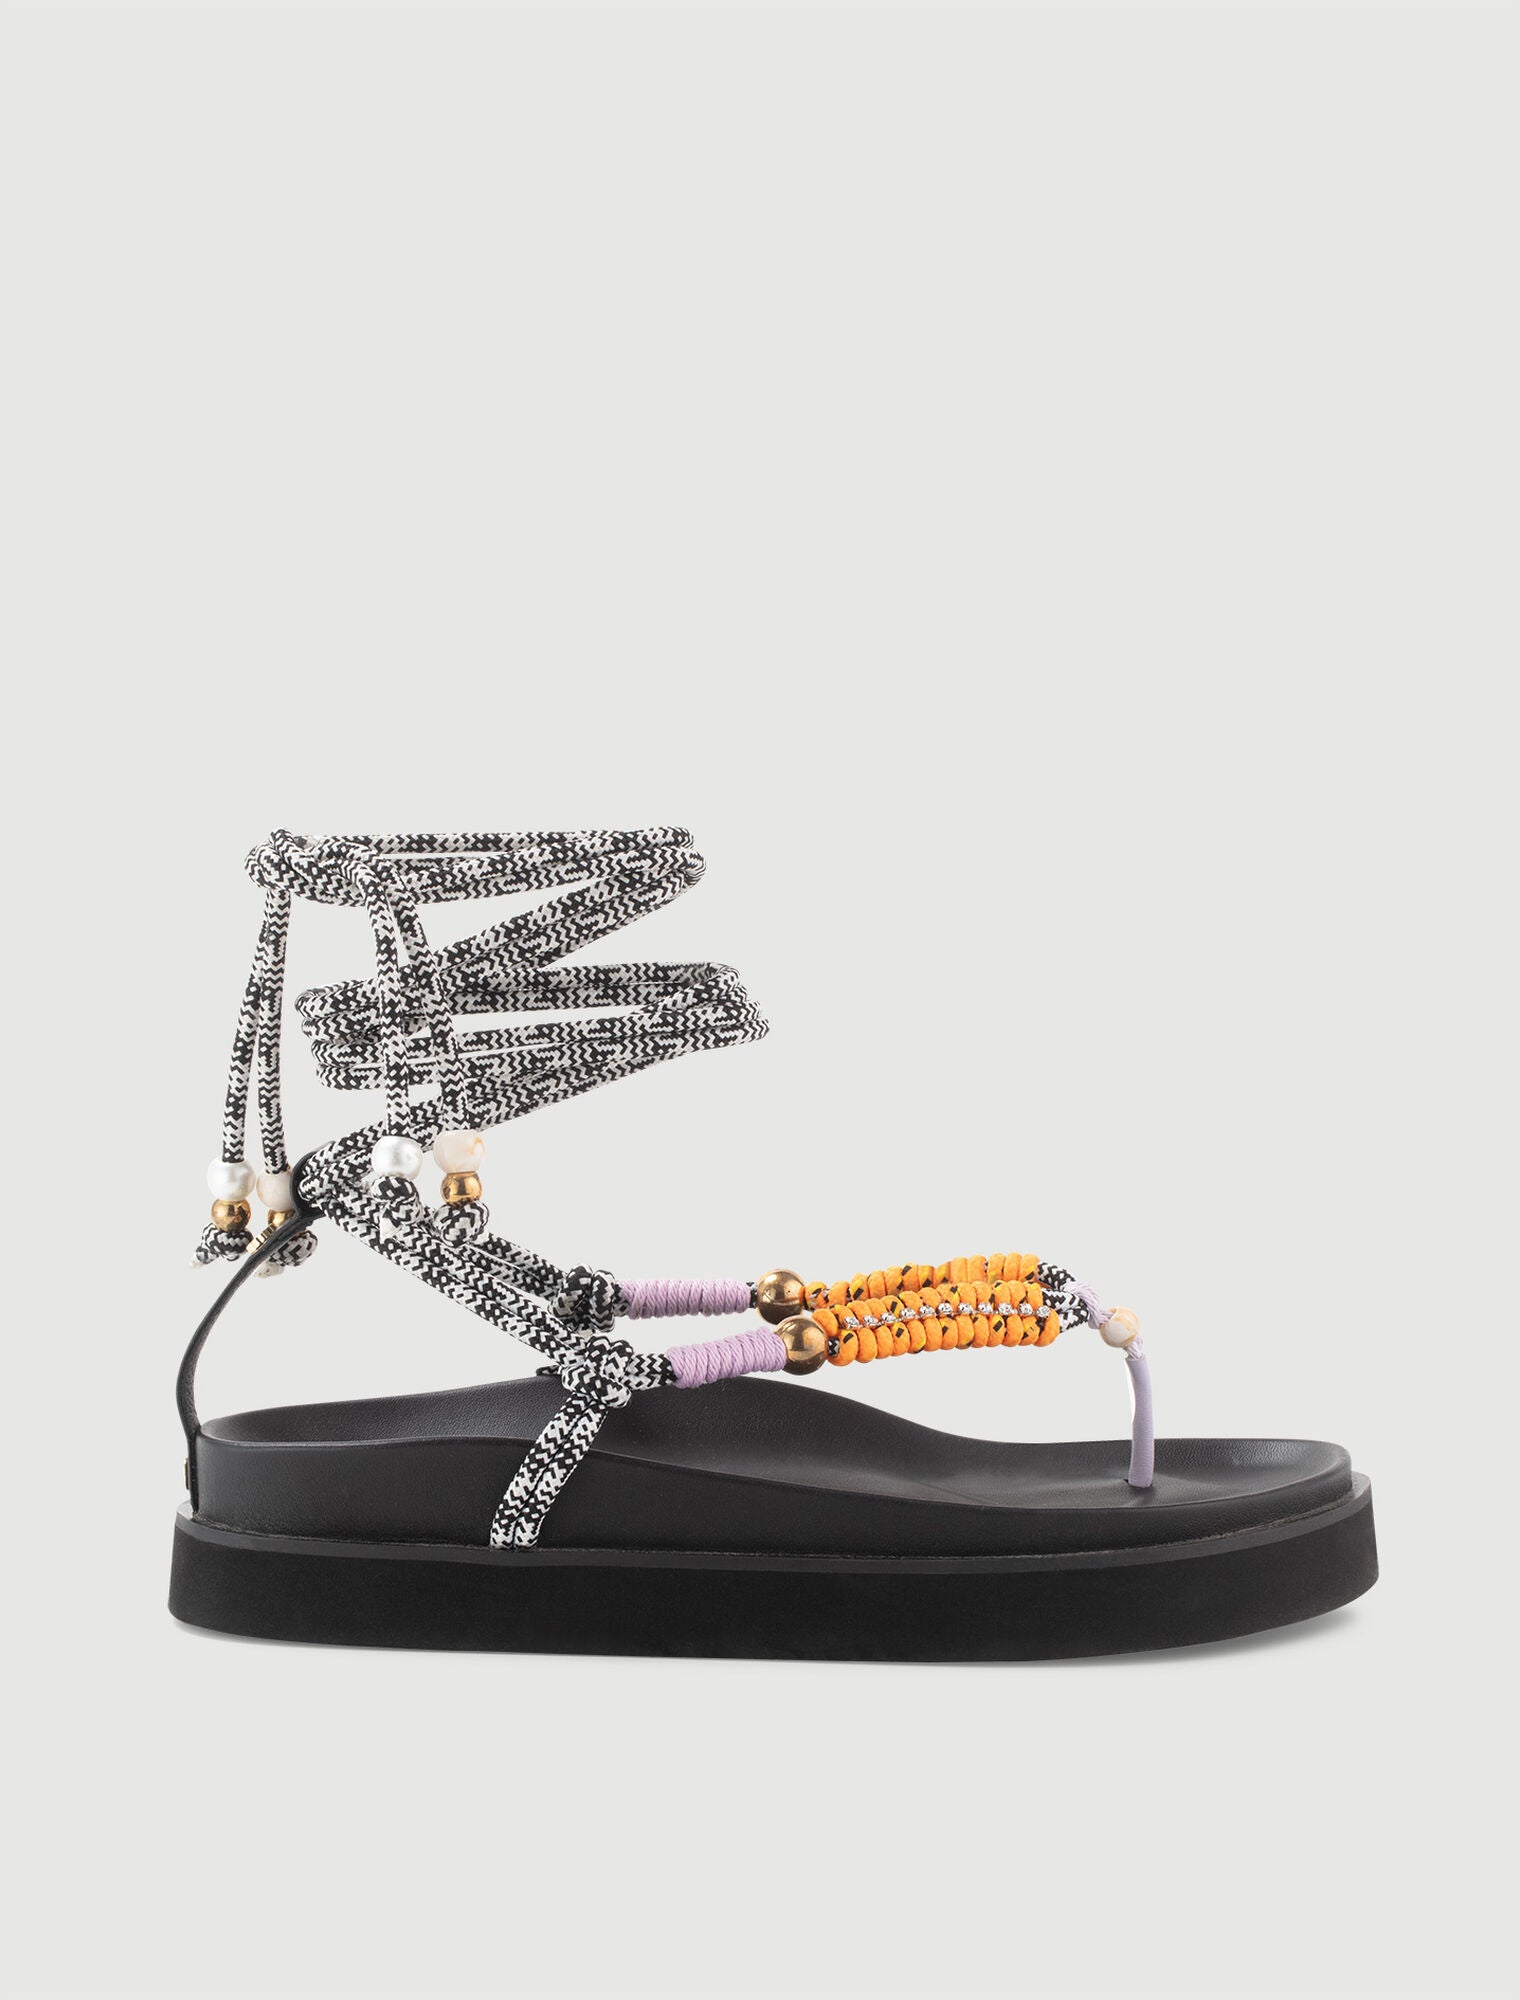 Parma Violet featured Sandals with braided straps